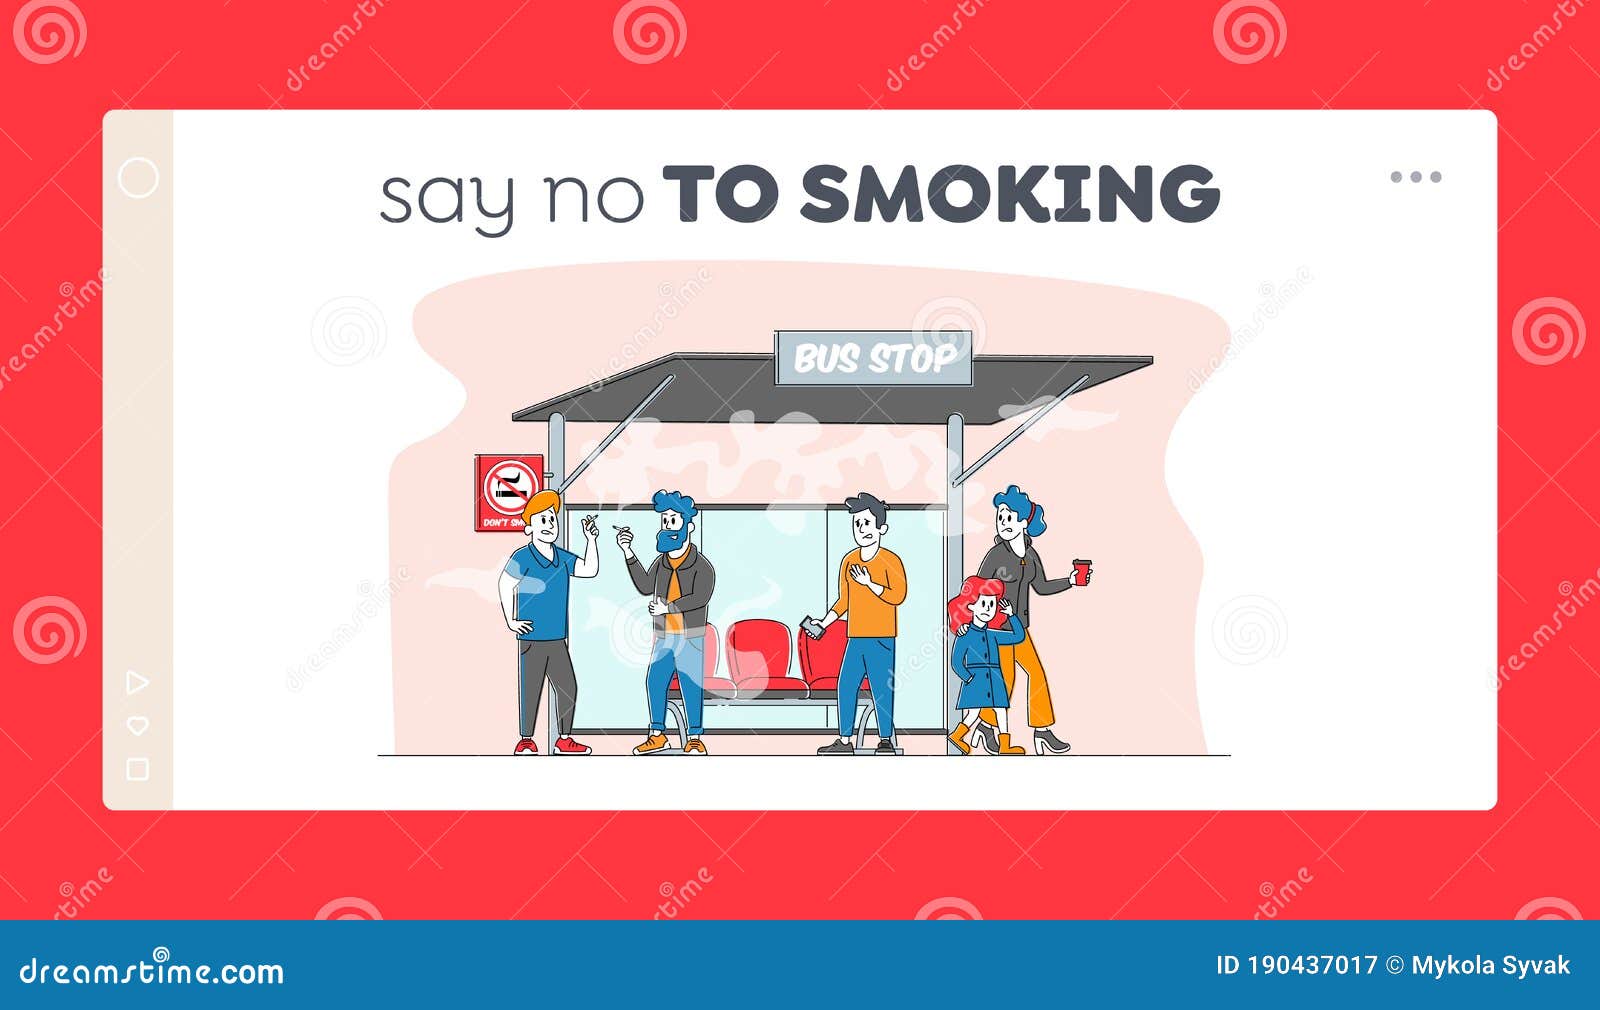 smoking in public place, bad habit landing page template. male characters smoke near prohibited sign on bus stop